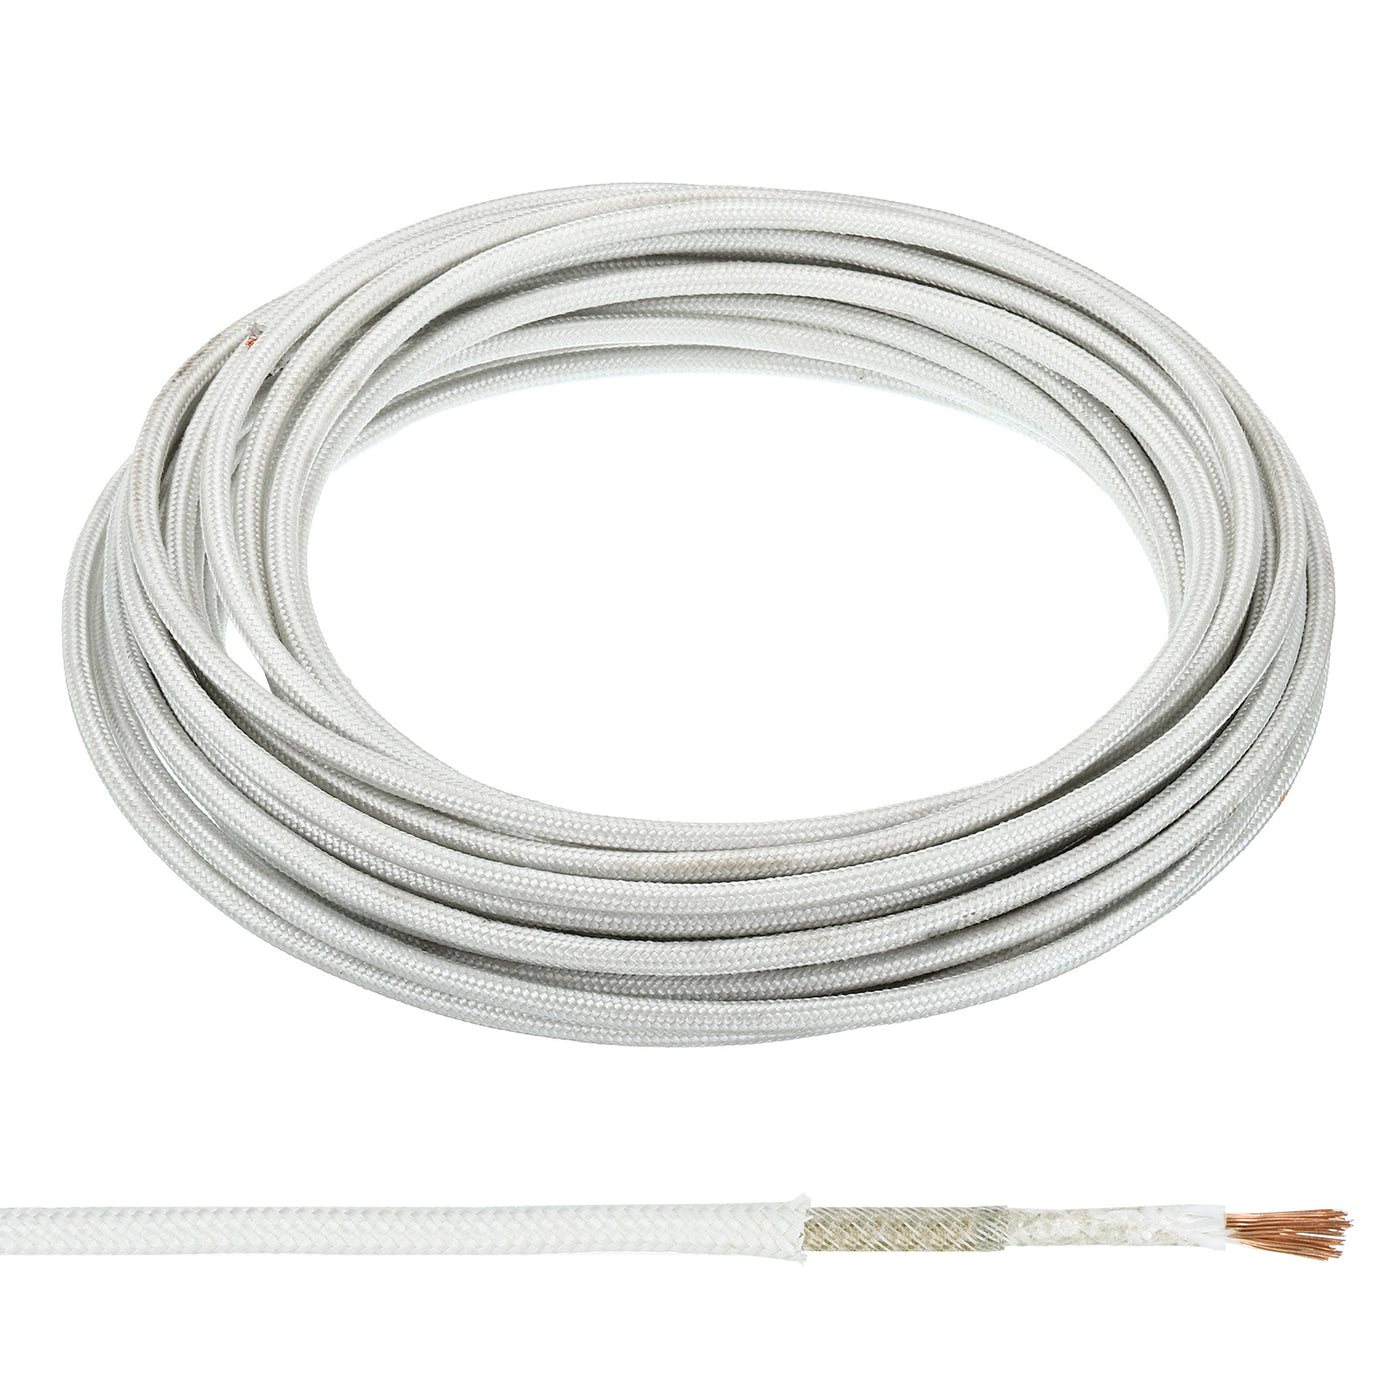 Harfington 9.8 Feet 11AWG Electronic Wire, Insulated High Temperature Resistant Electrical Flexible Mica Cable for Lamp Boiler Heater, White